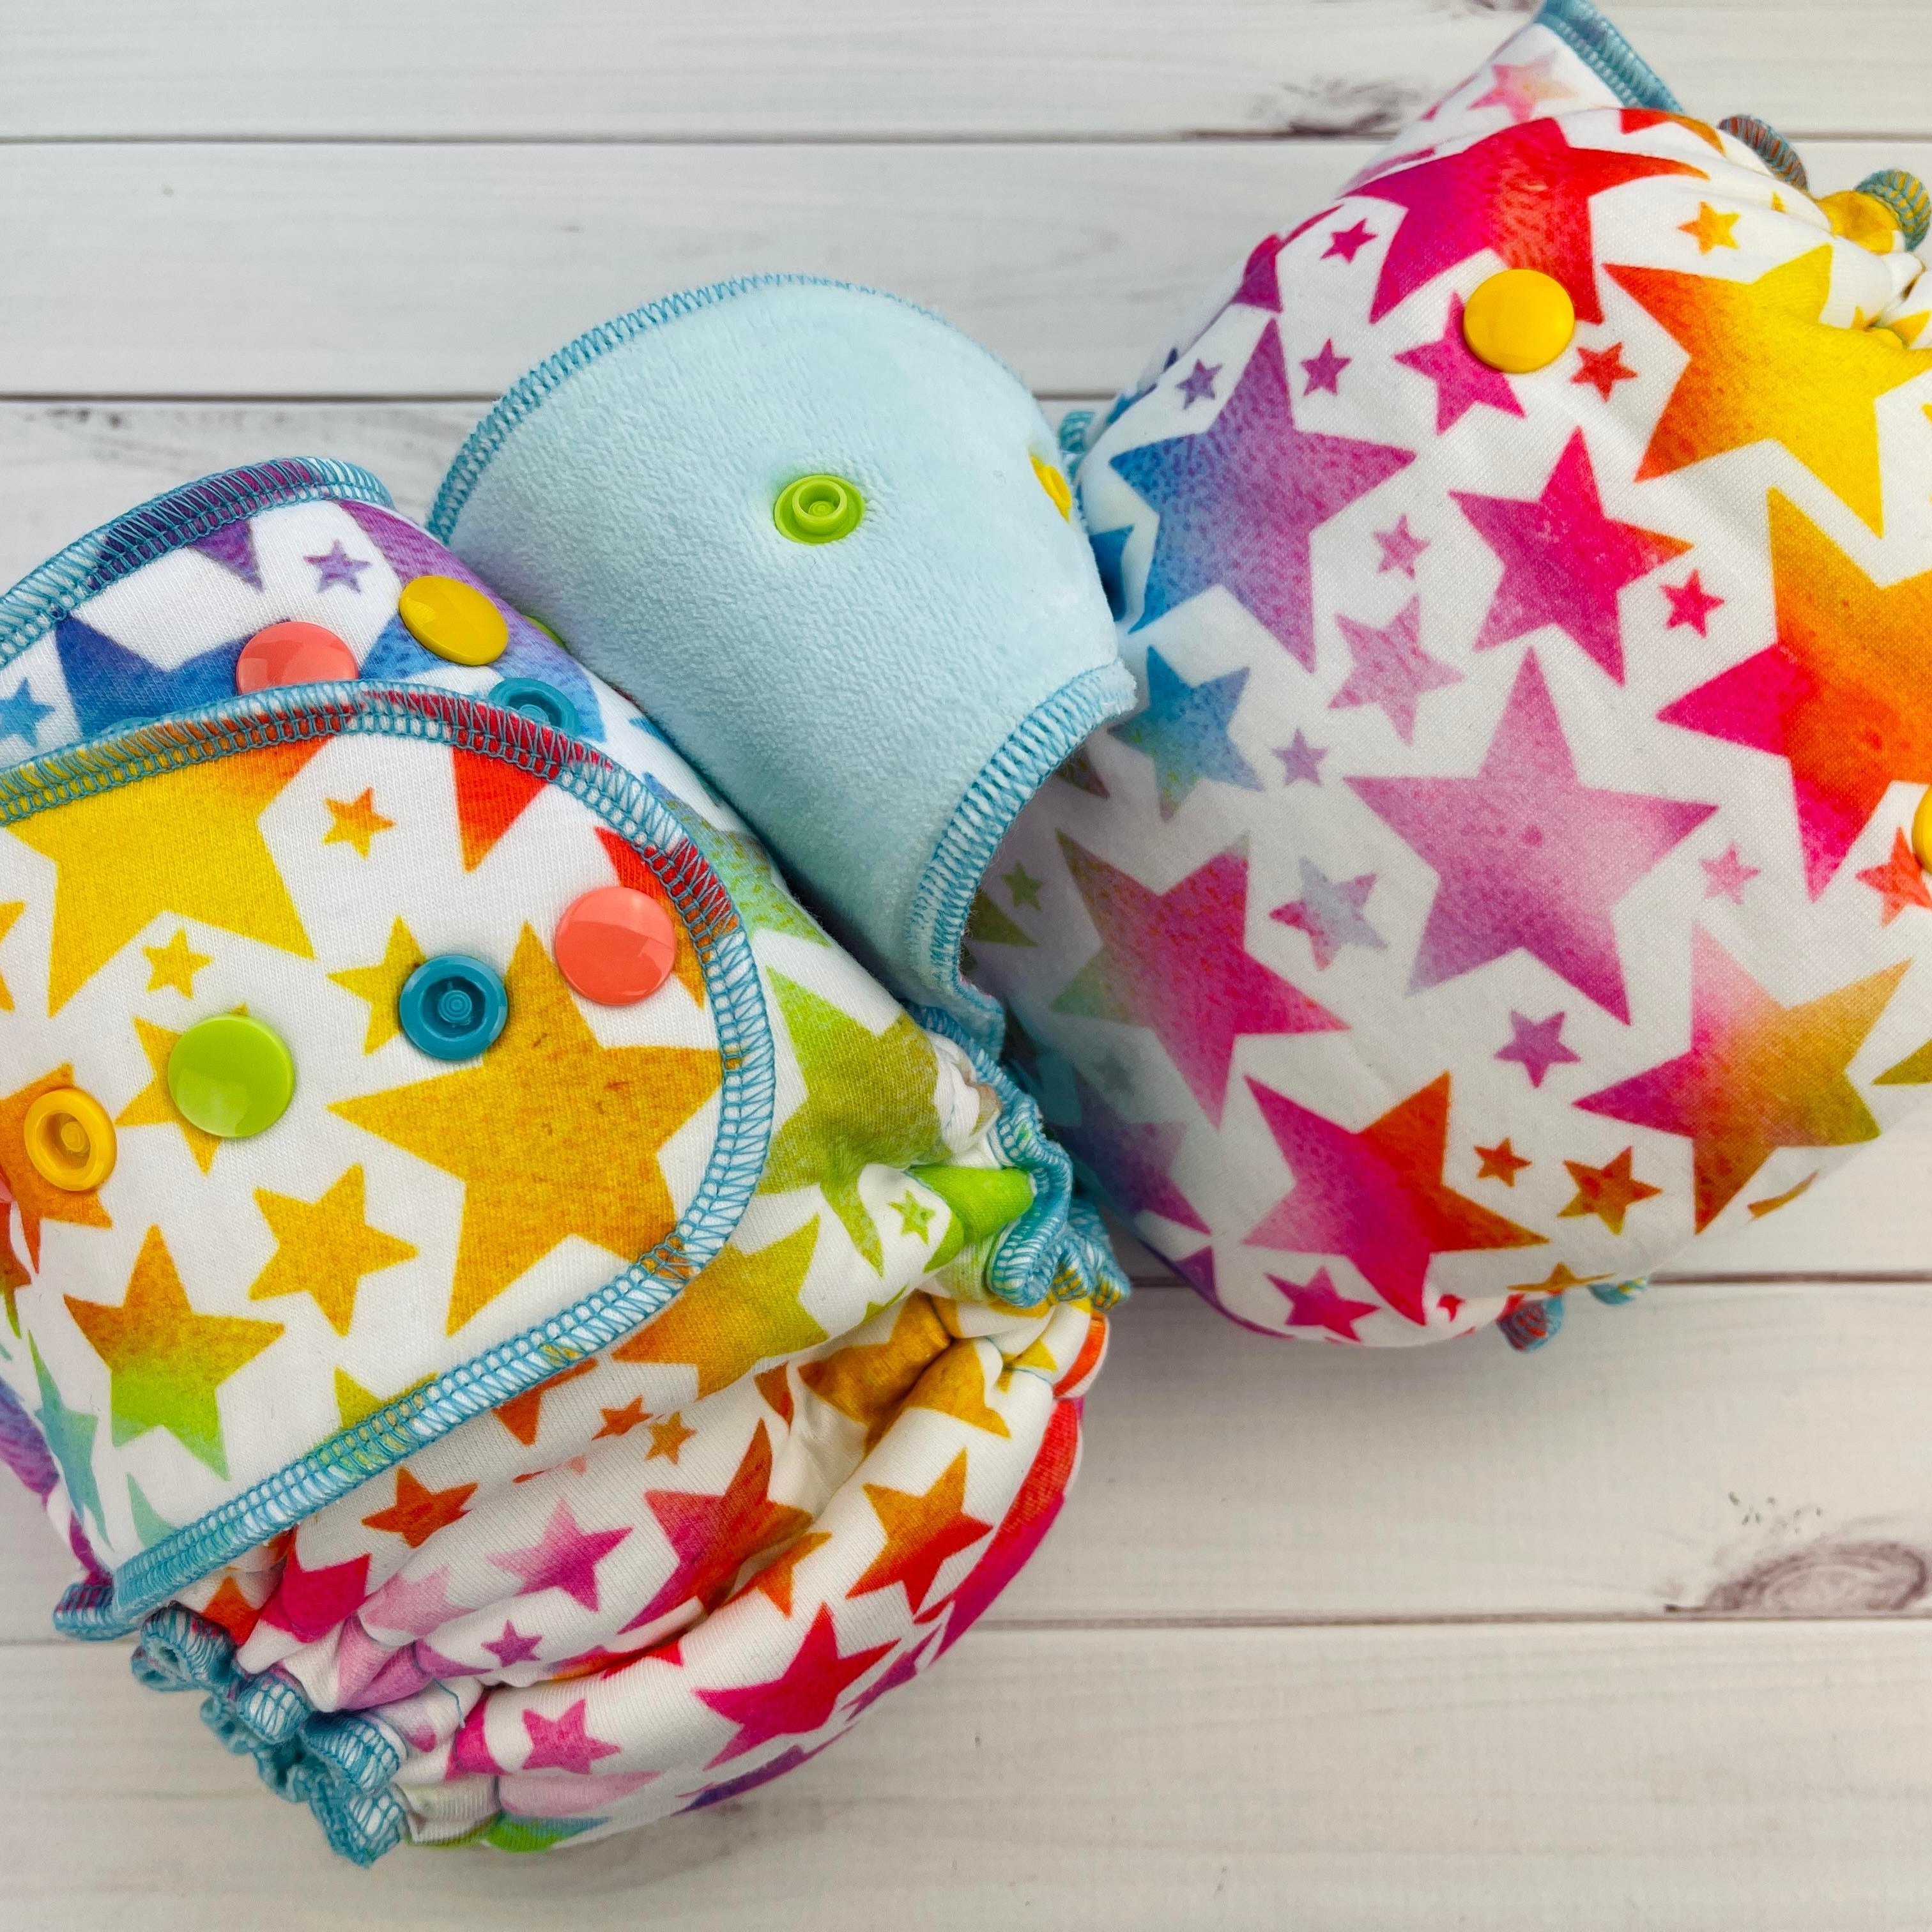 Lilly & Frank One Size Cloth Diaper Spectacular Stars One Size Cloth Diaper - Hybrid - Serged